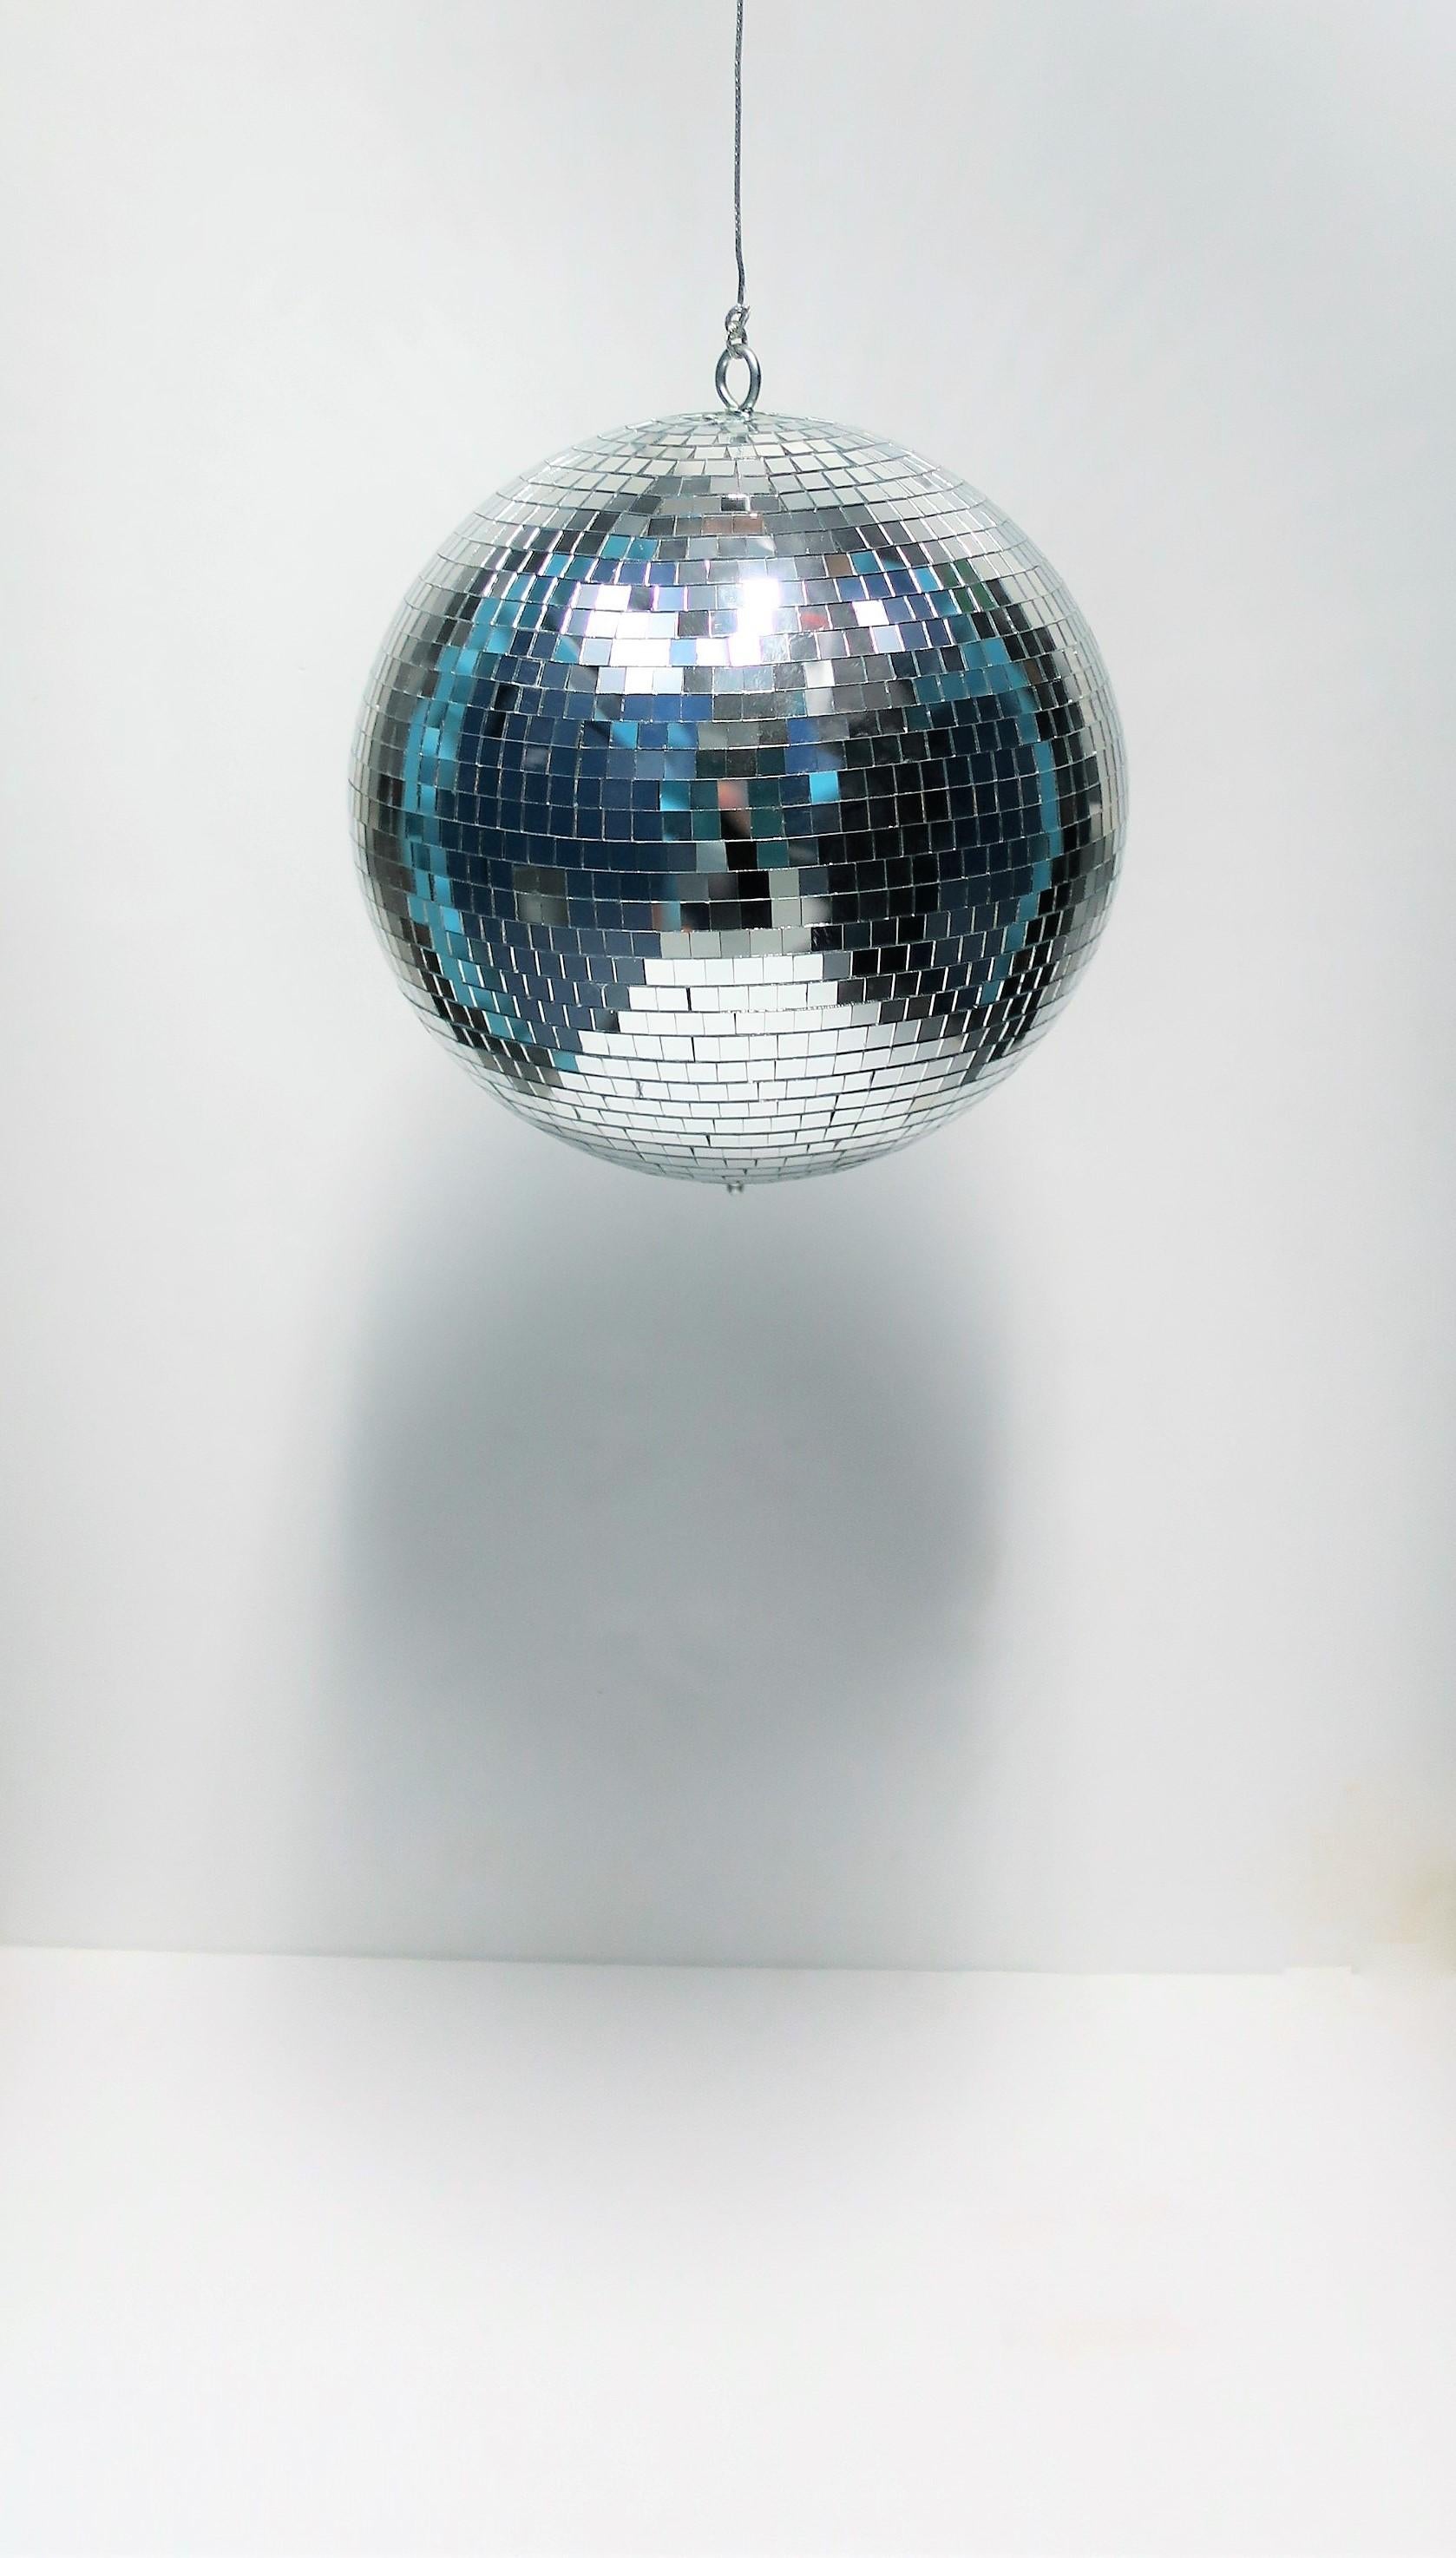 A 1970s Modern style disco ball in mirrored glass. 

Ball measures: 11